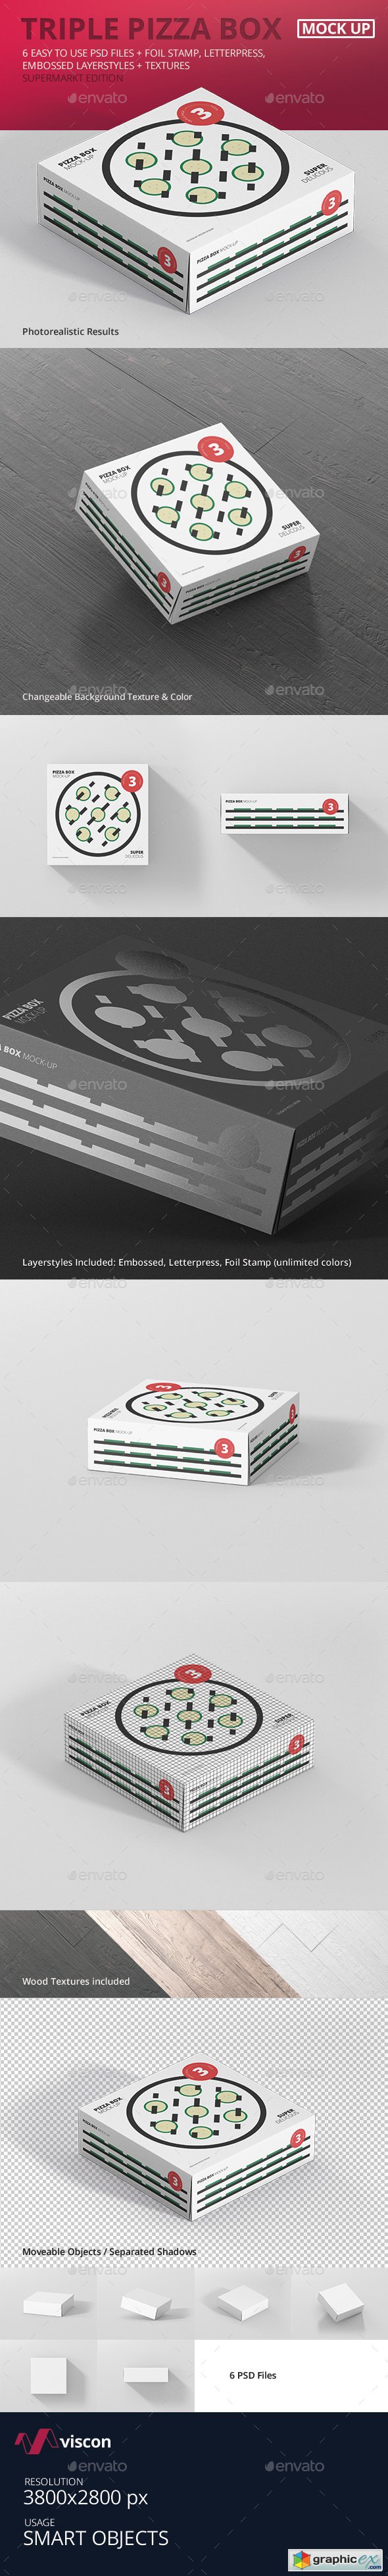 Pizza Box Mock-Up - Triple Pack Supermarket Edition